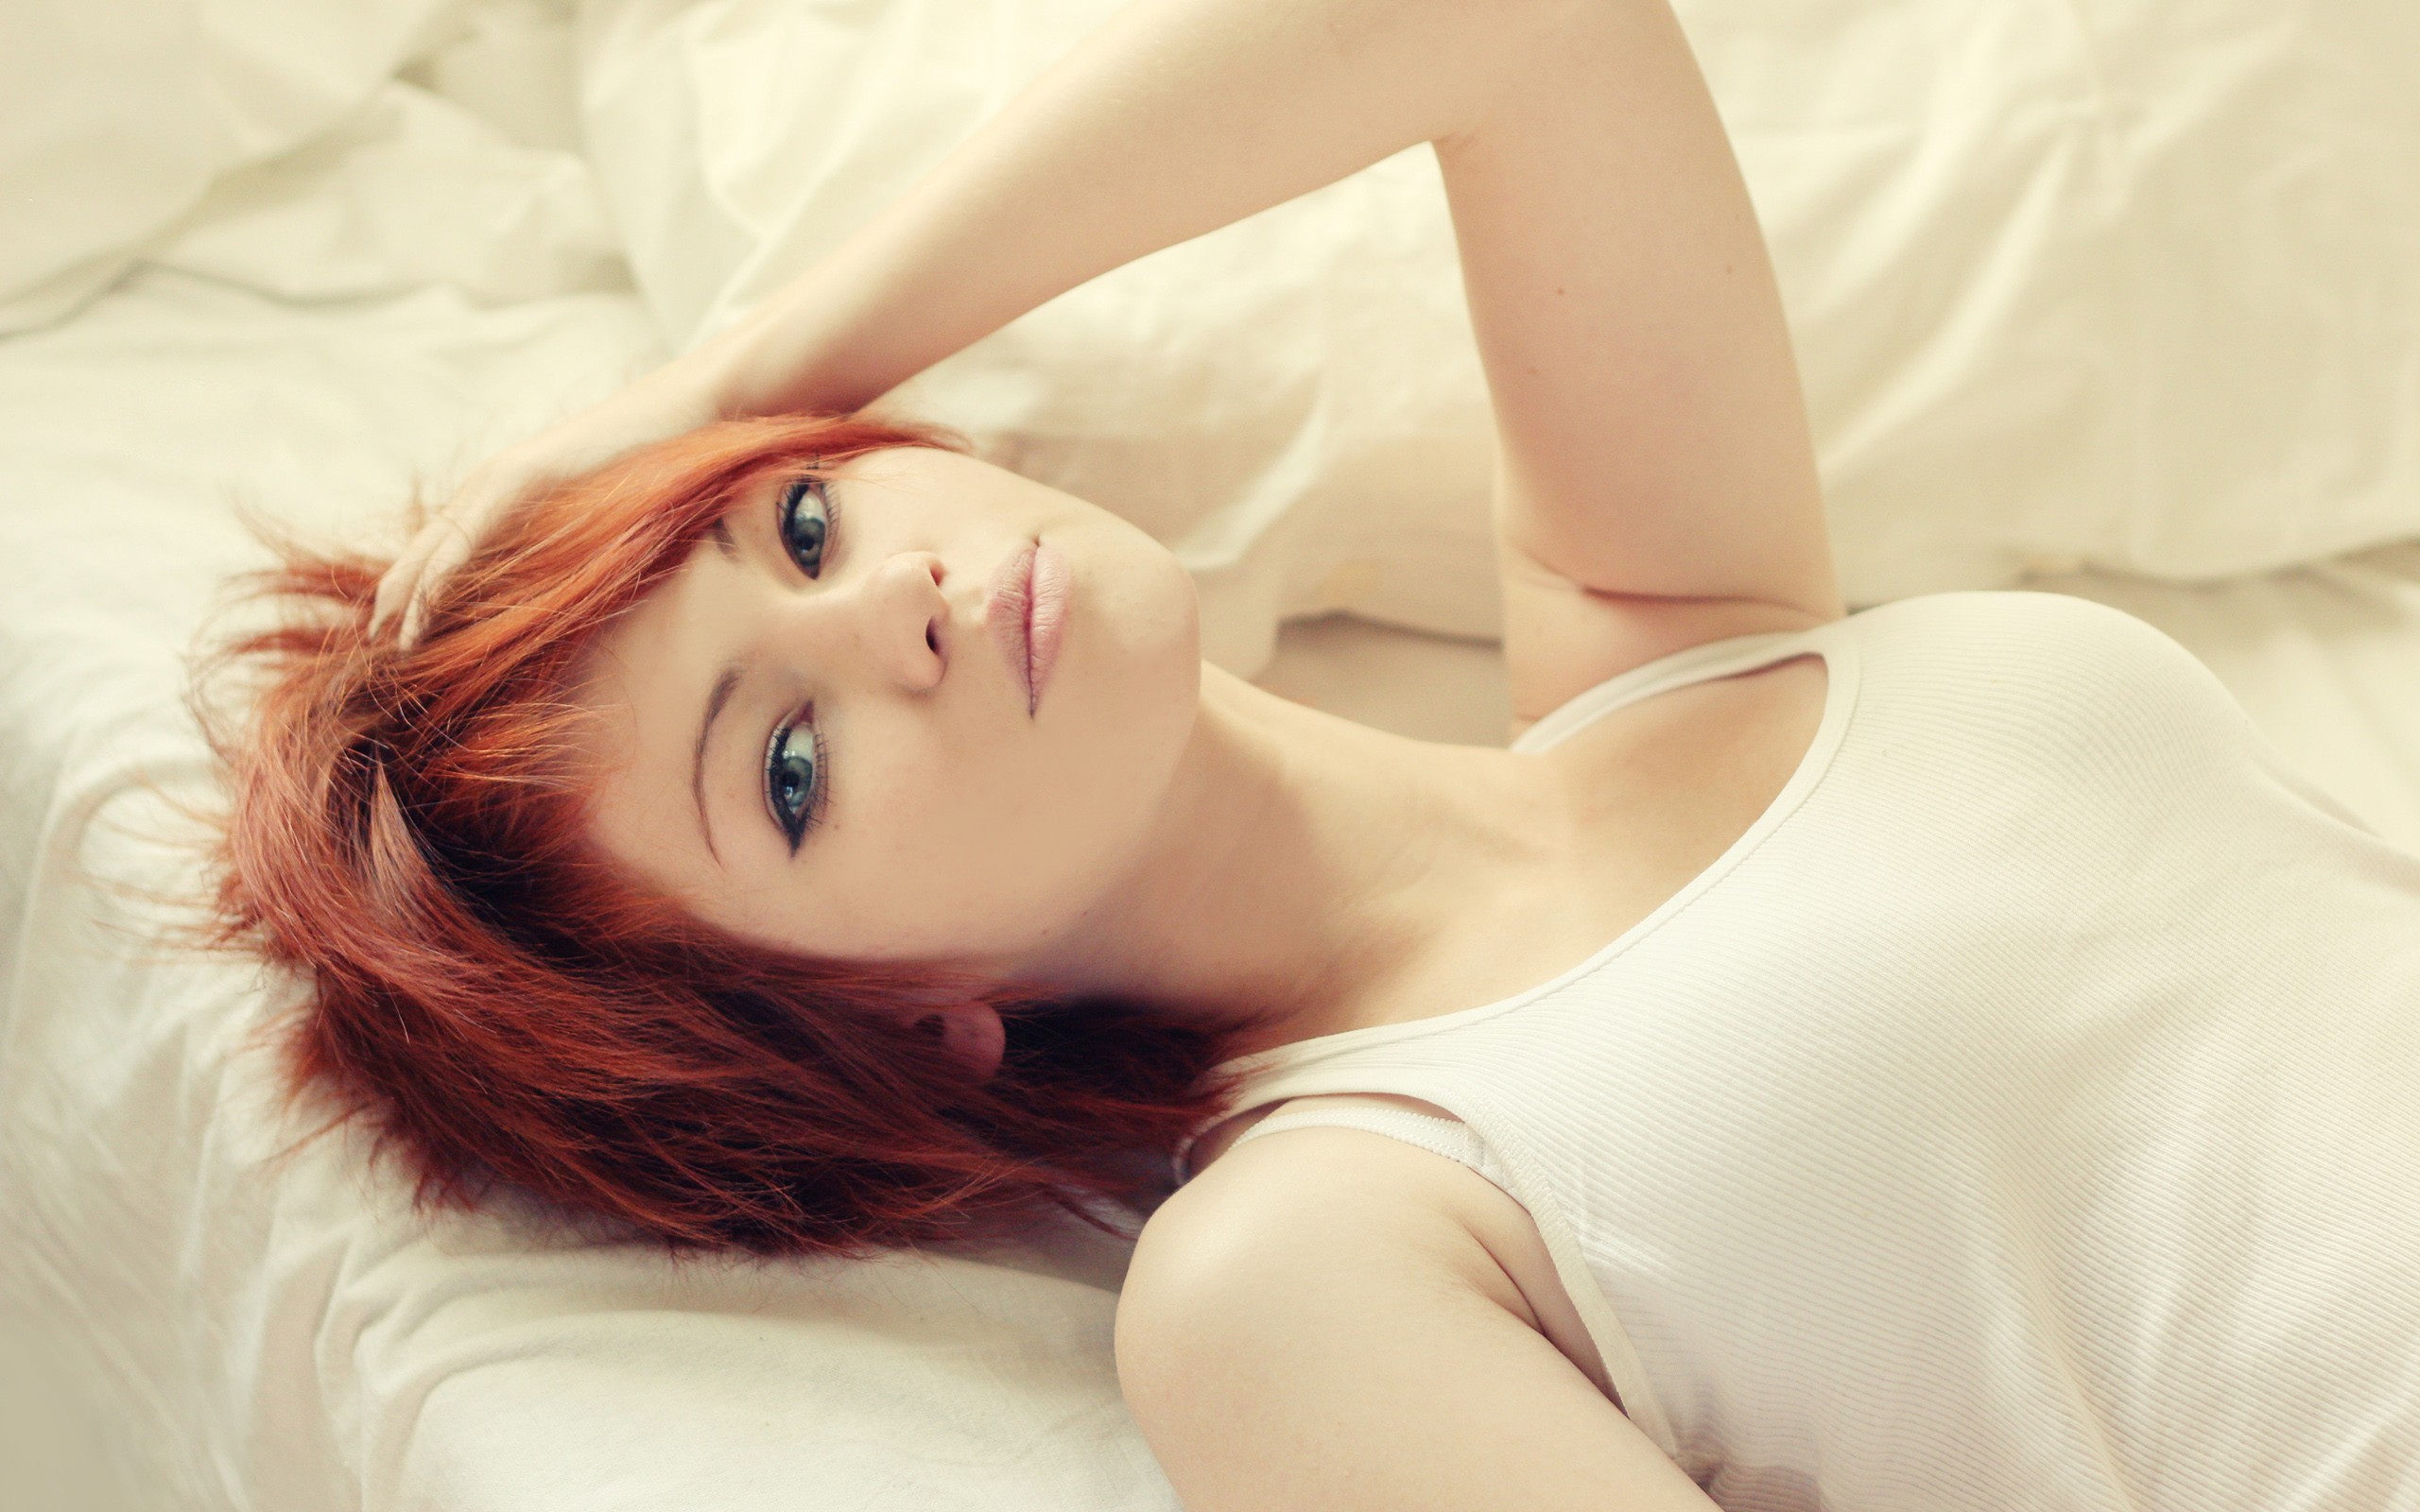 Redhead In Bed 51